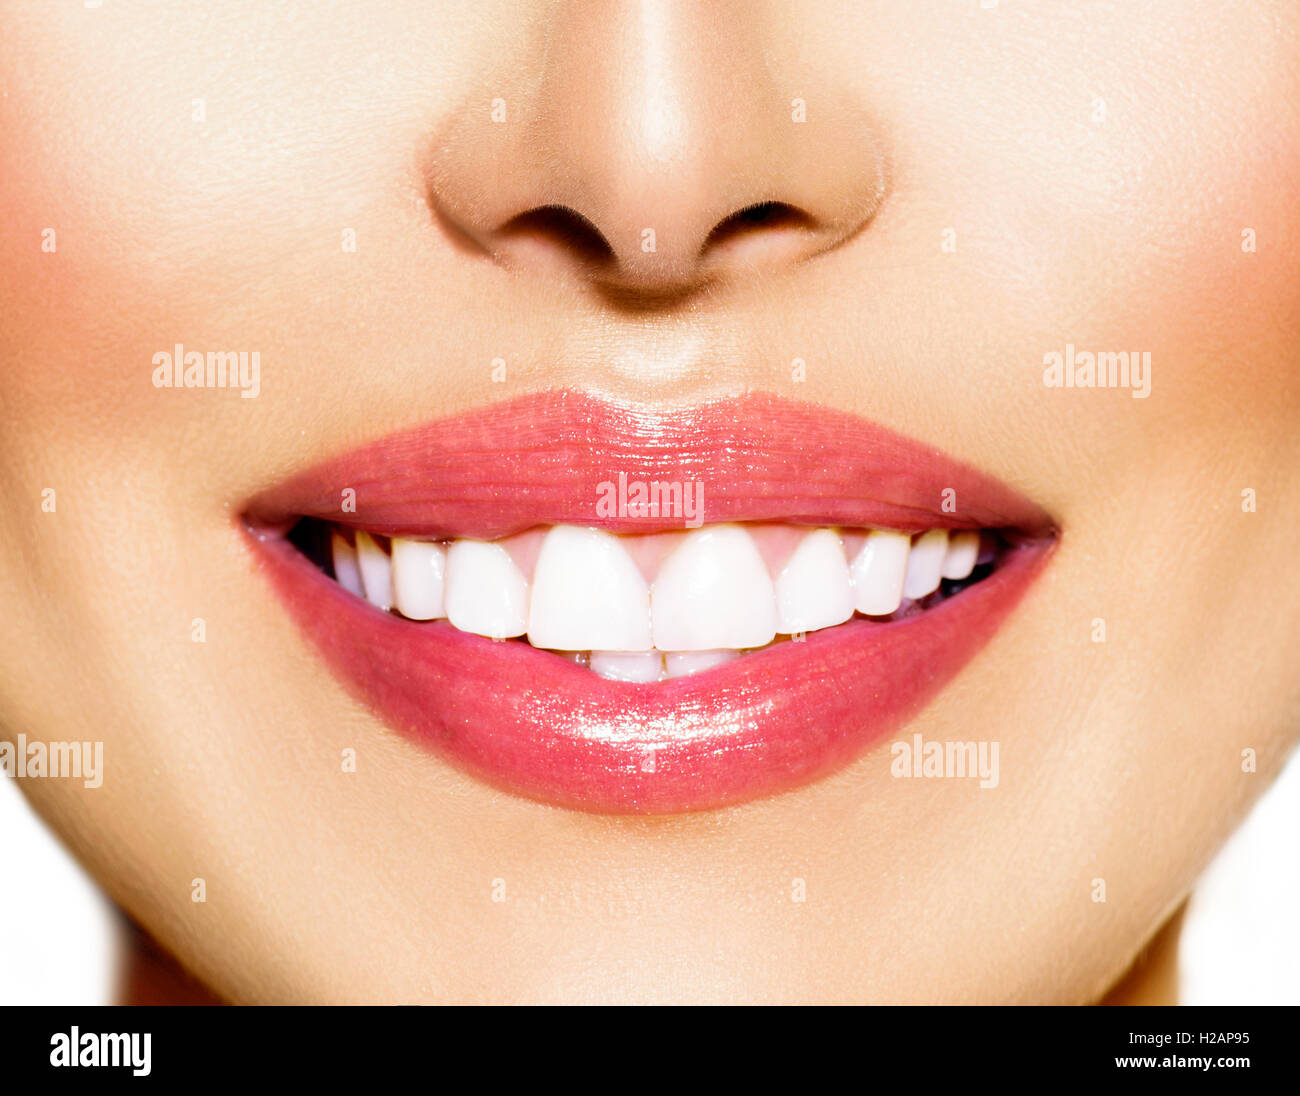 Healthy Smile. Teeth Whitening. Dental Care Concept Stock Photo